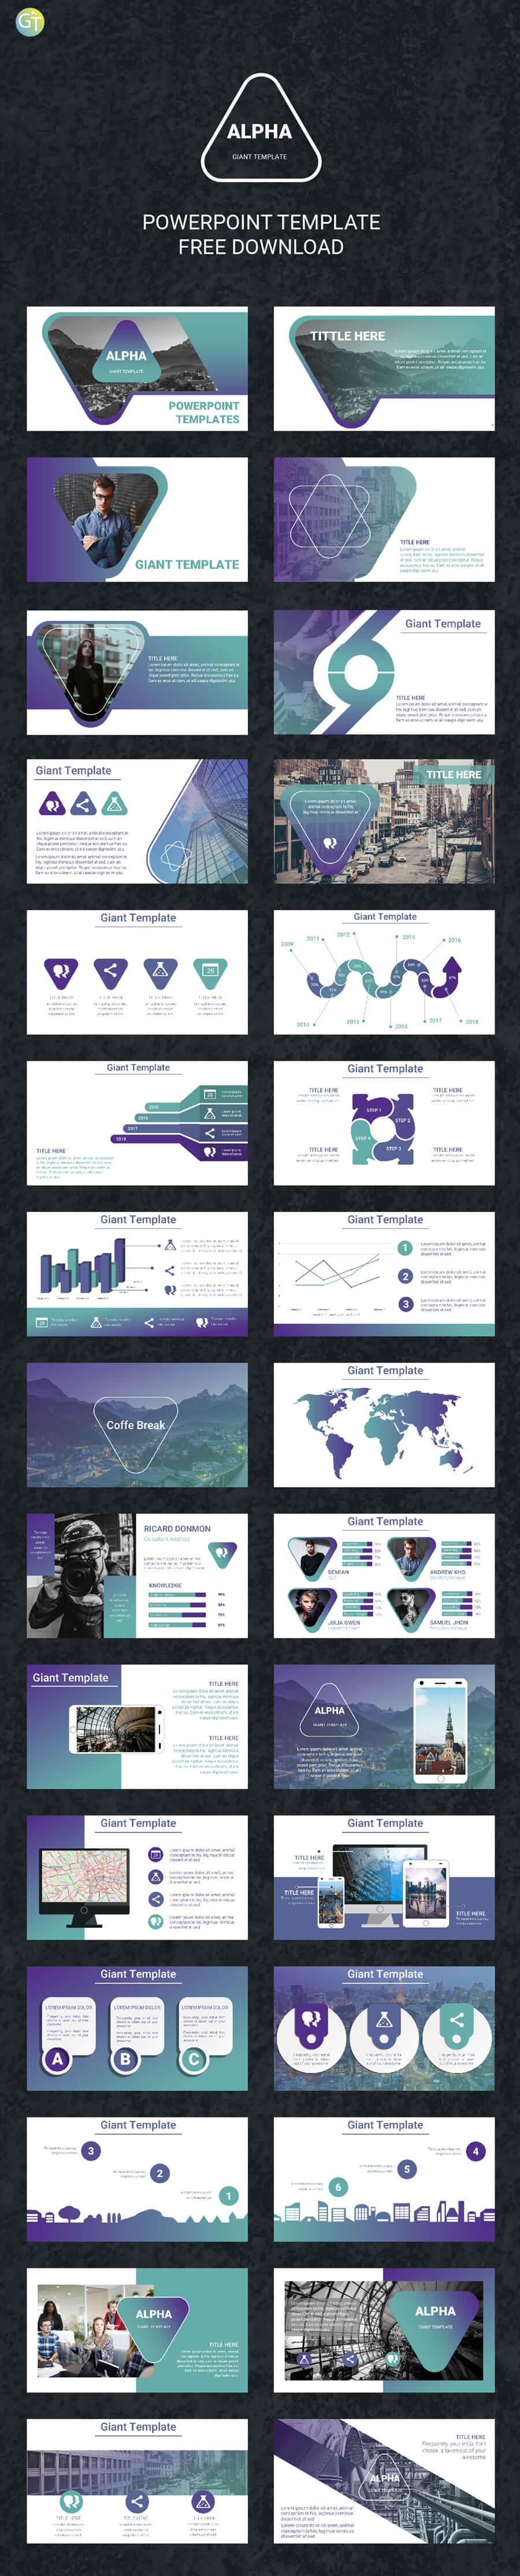 ALPHA - FREE POWERPOINT TEMPLATE